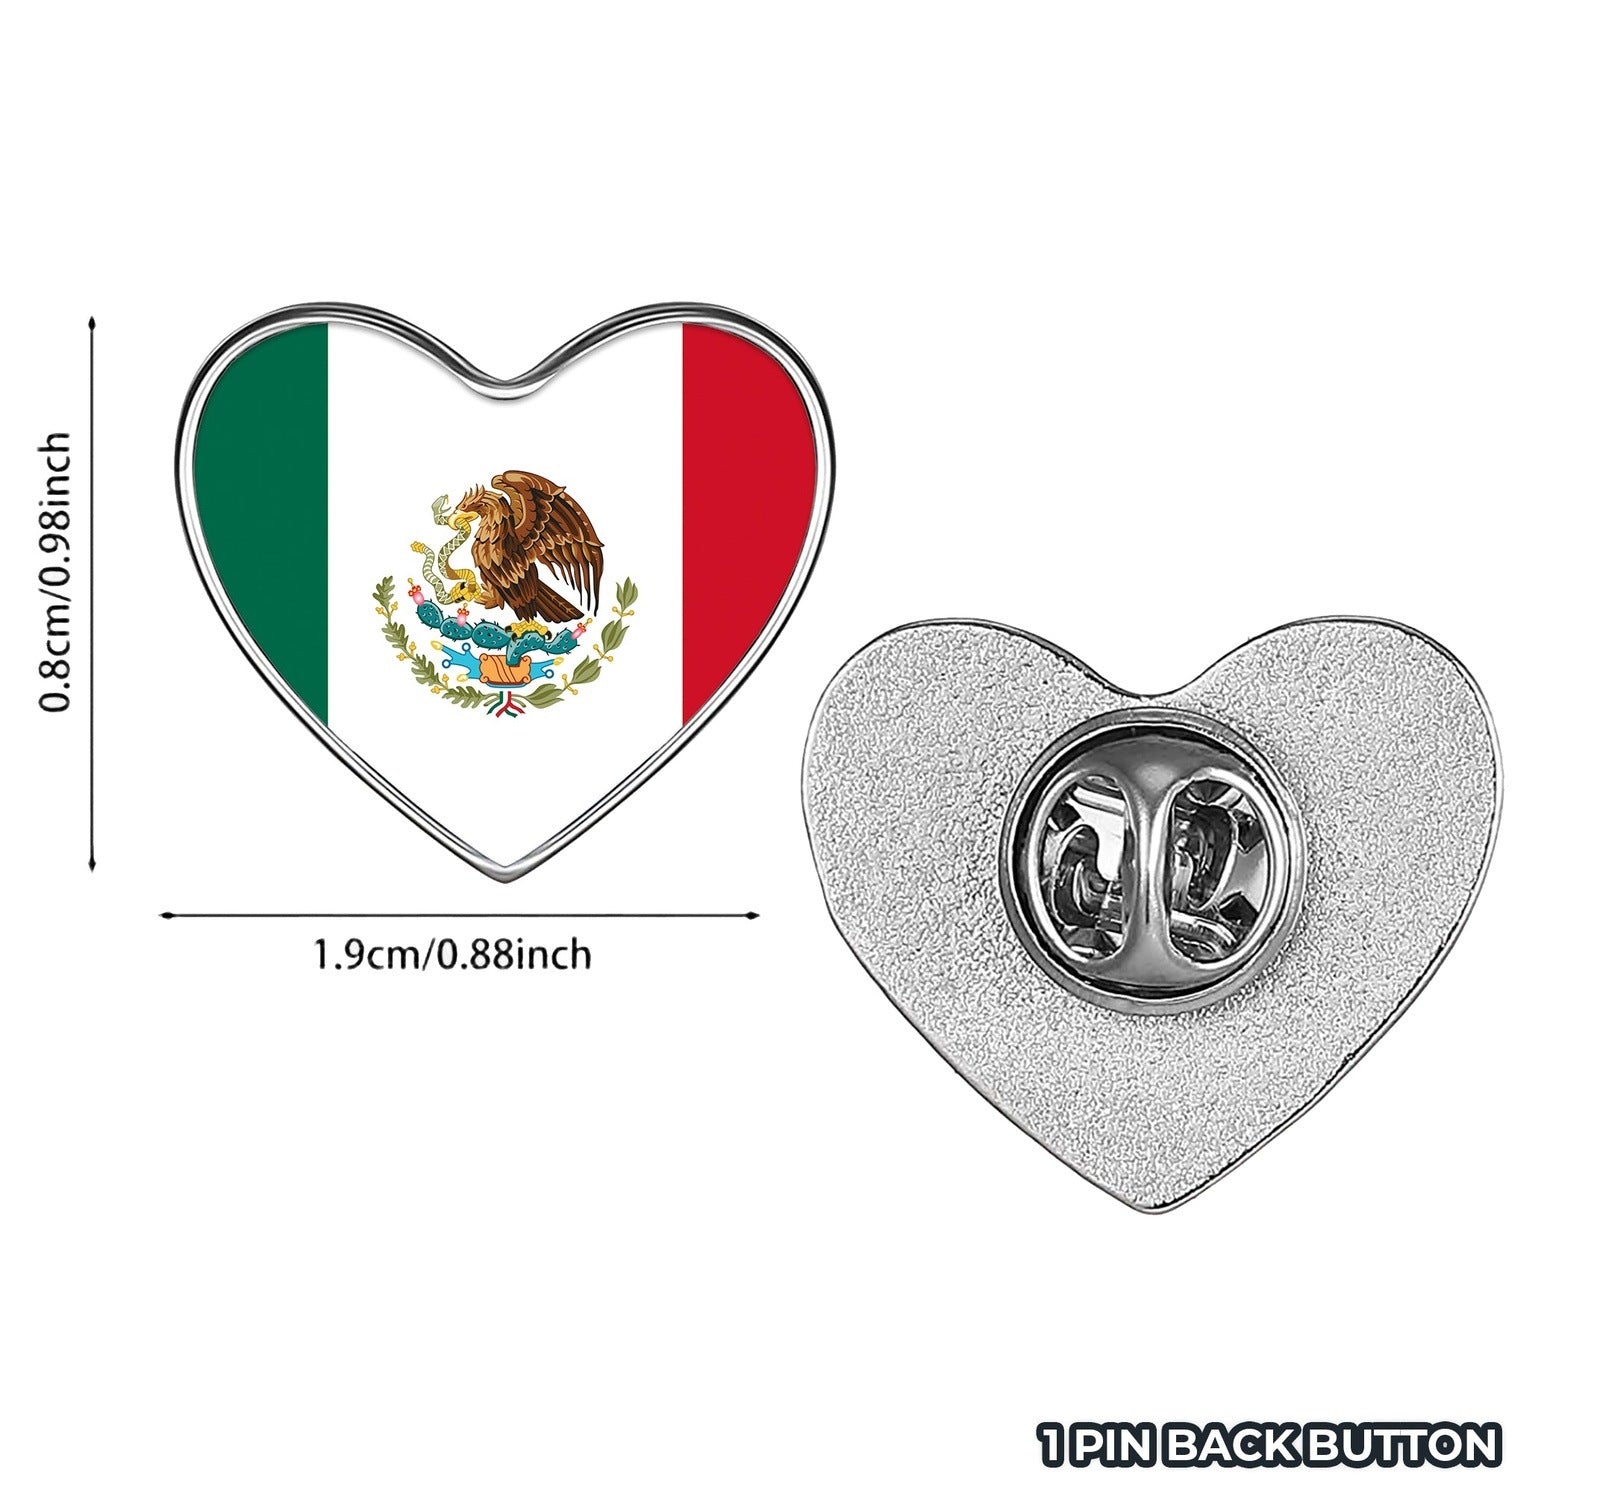 World Flag Metal Heart Pinback Lapel Button - You Pick Your Flag, Many to Choose from!